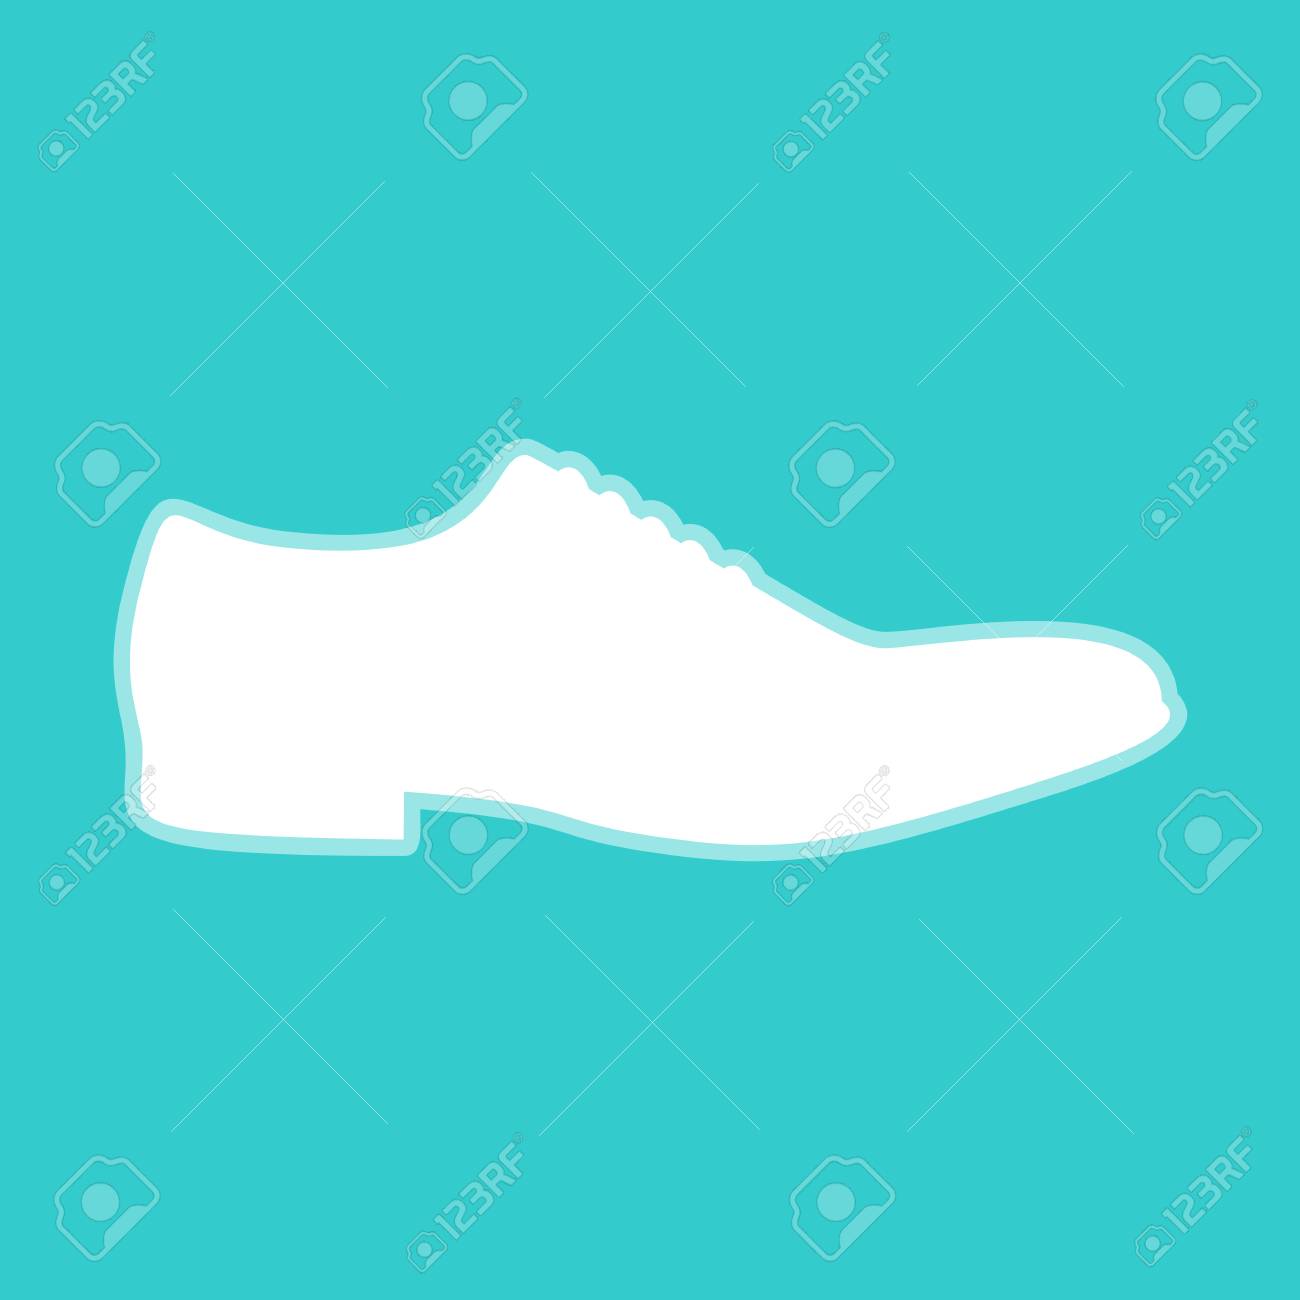 Free download Men Shoes Icon White Icon With Whitish Background On ...